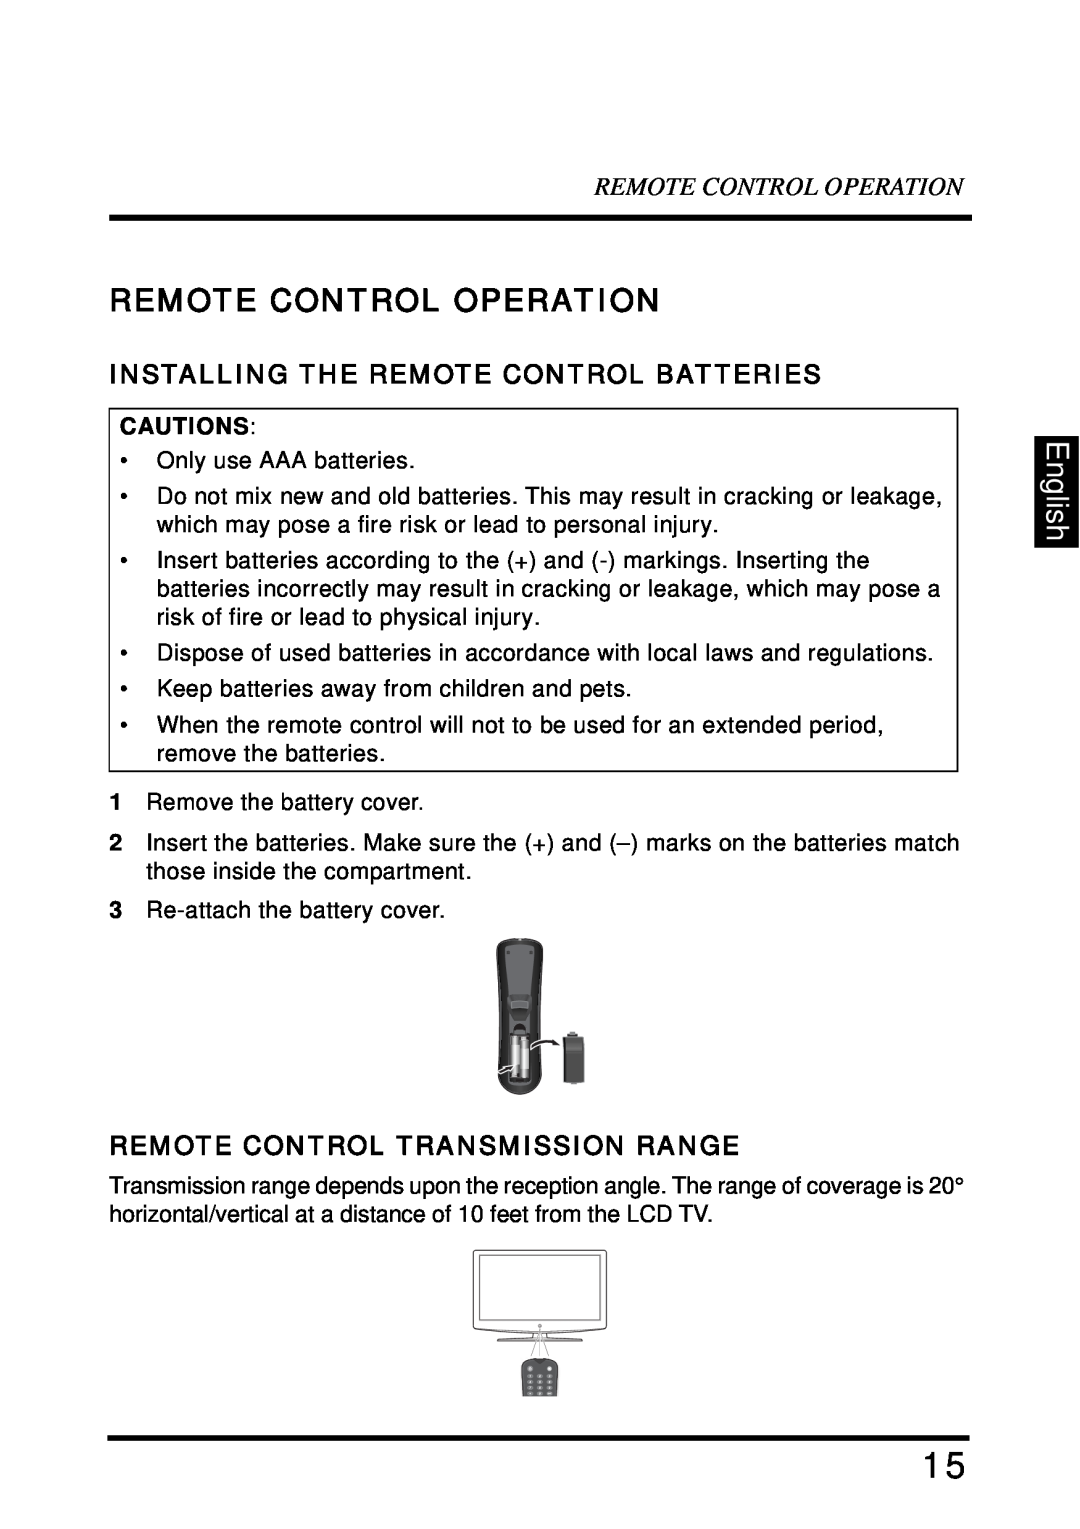 Westinghouse SK-32H640G user manual Remote Control Operation, English, Installing The Remote Control Batteries, Cautions 